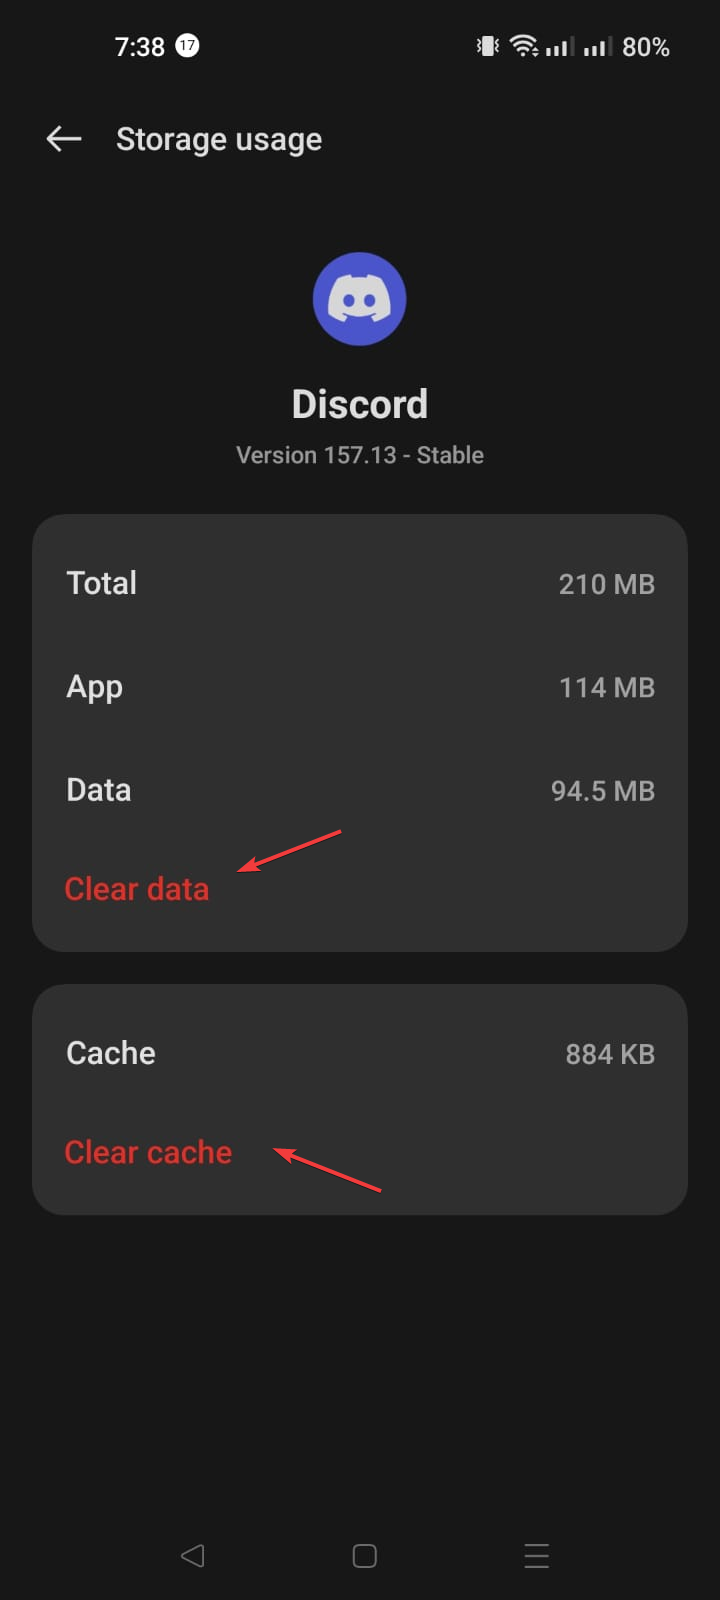 Clear data and Clear cache